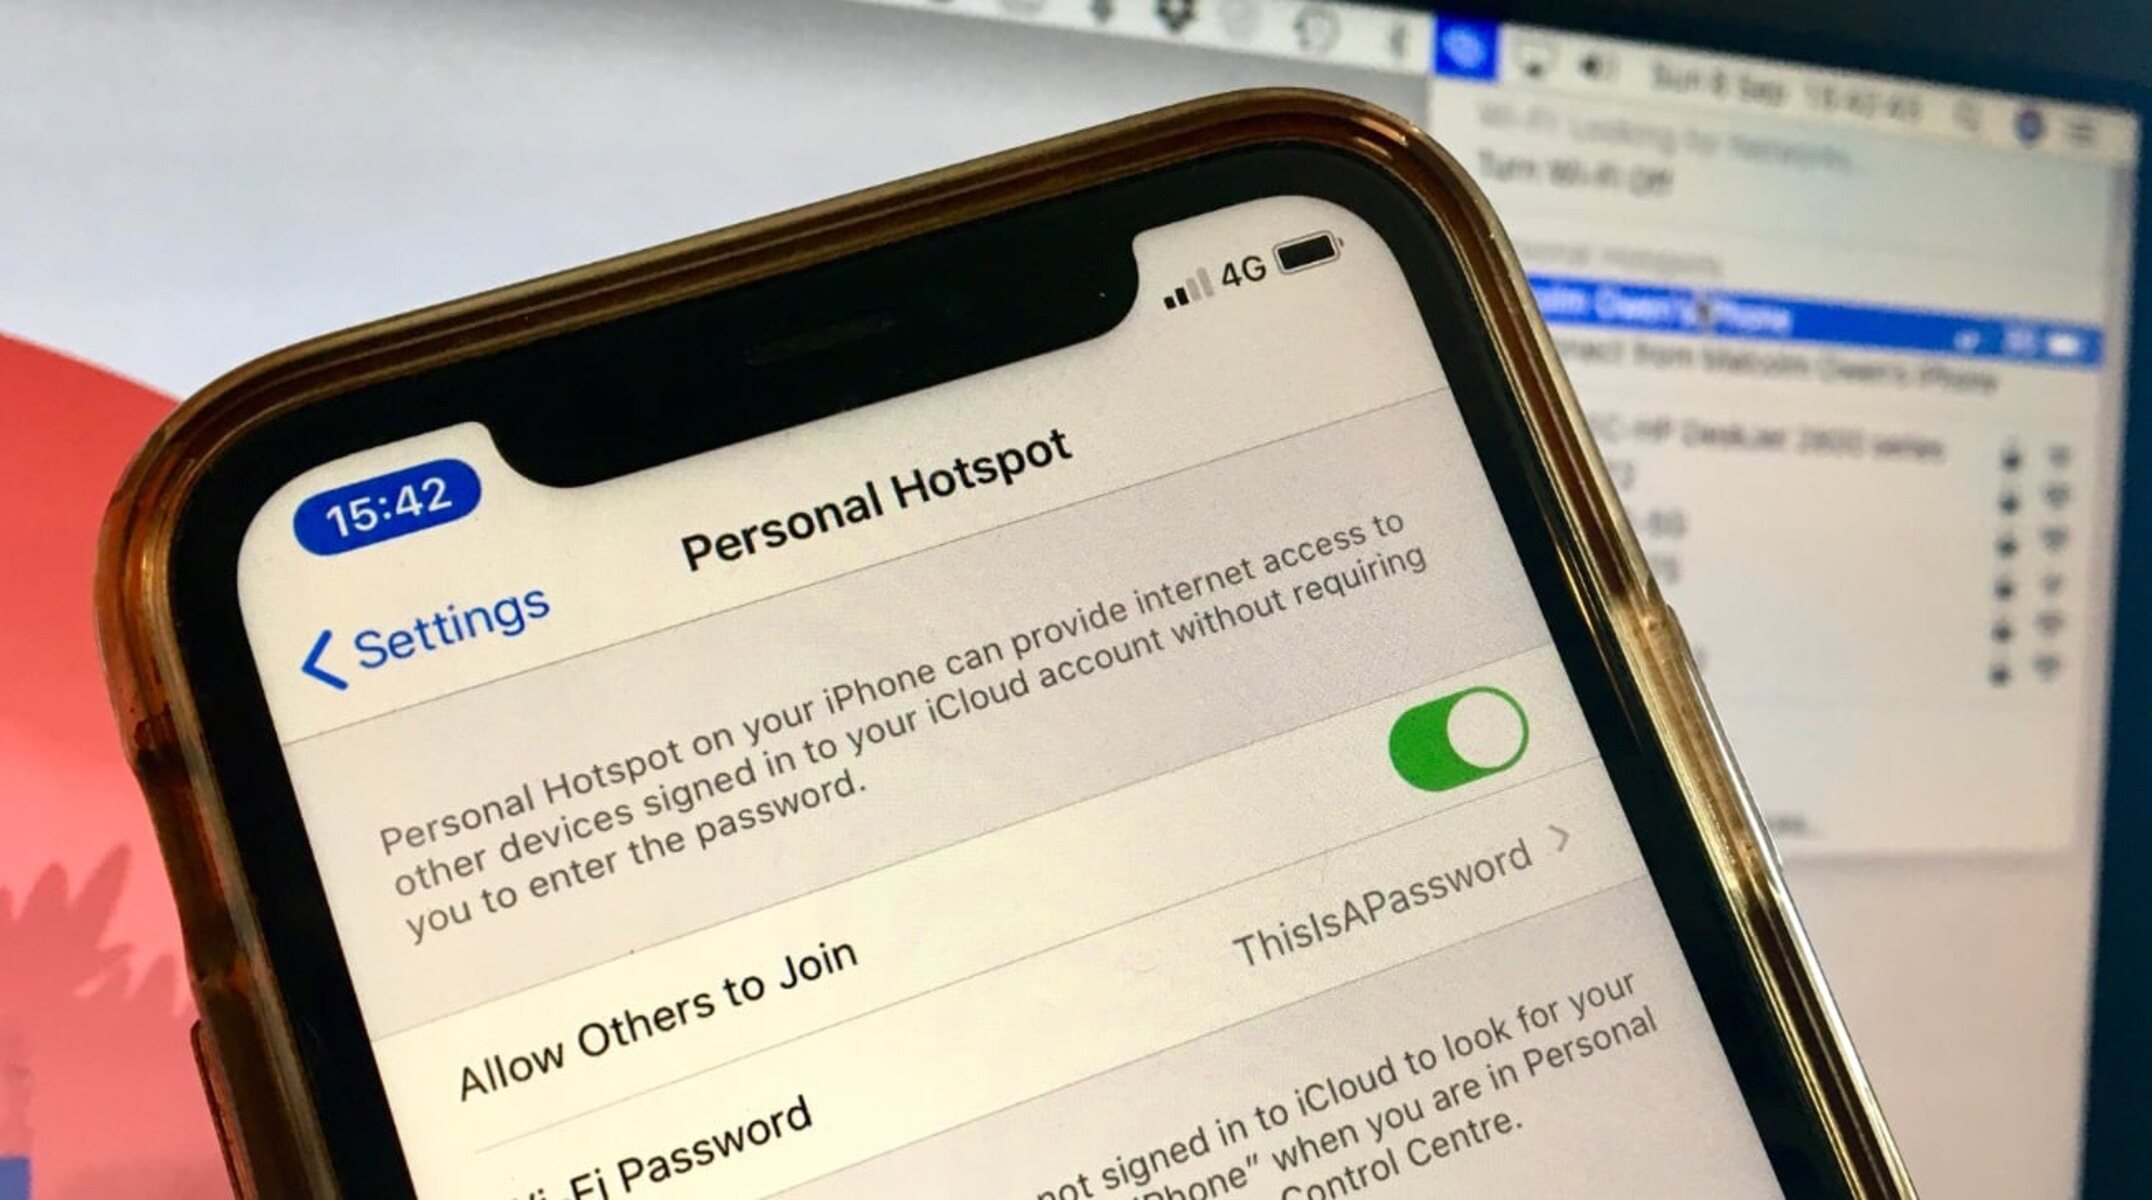 Do Unlimited Data Plans Include IPhone Personal Hotspot?